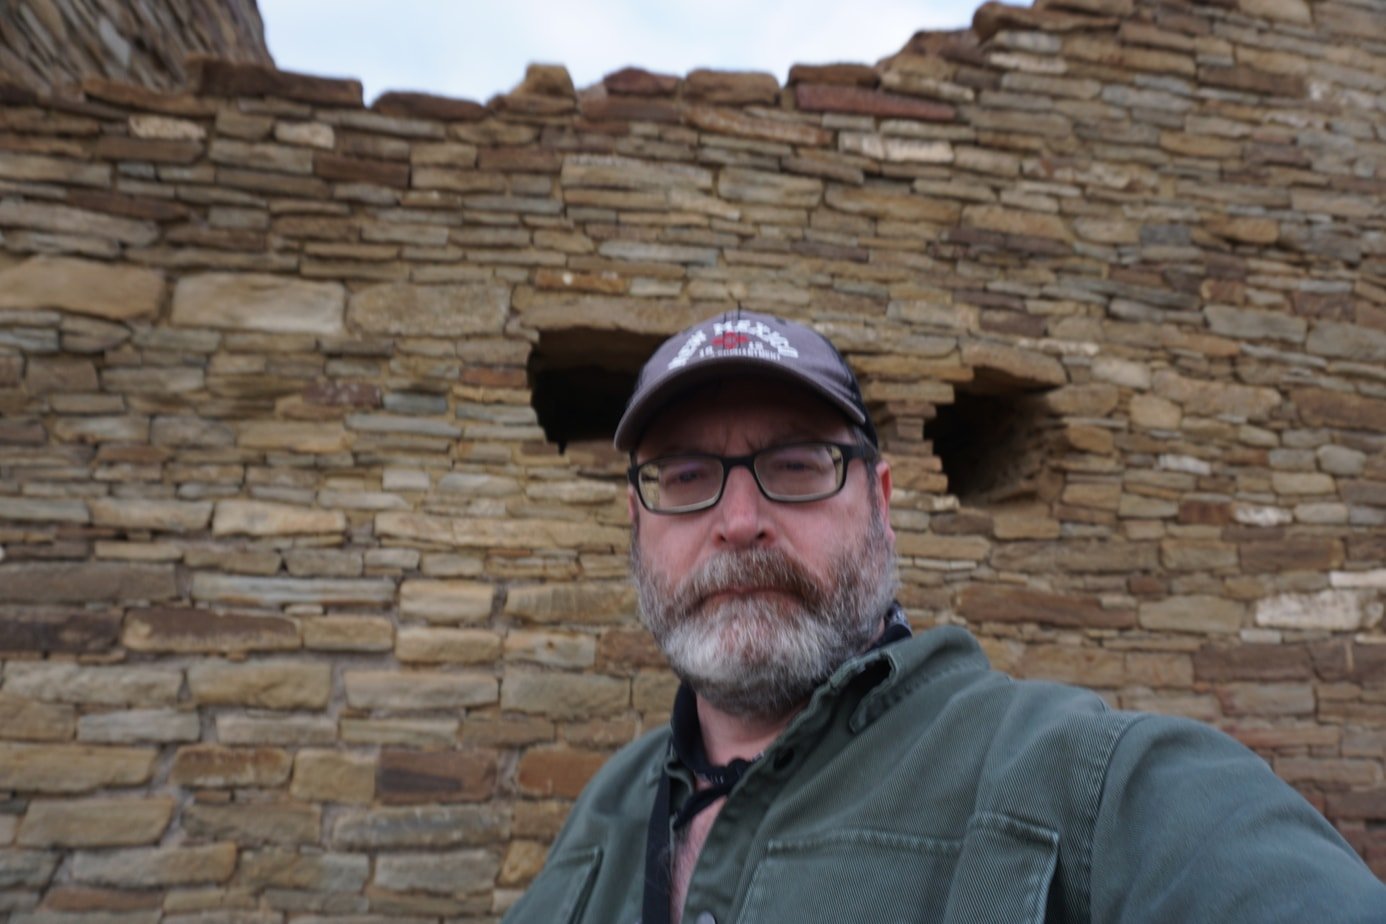 John Gentry im Chaco Culture National Historical Park Pueblo Bonito Ruins Reisetrends